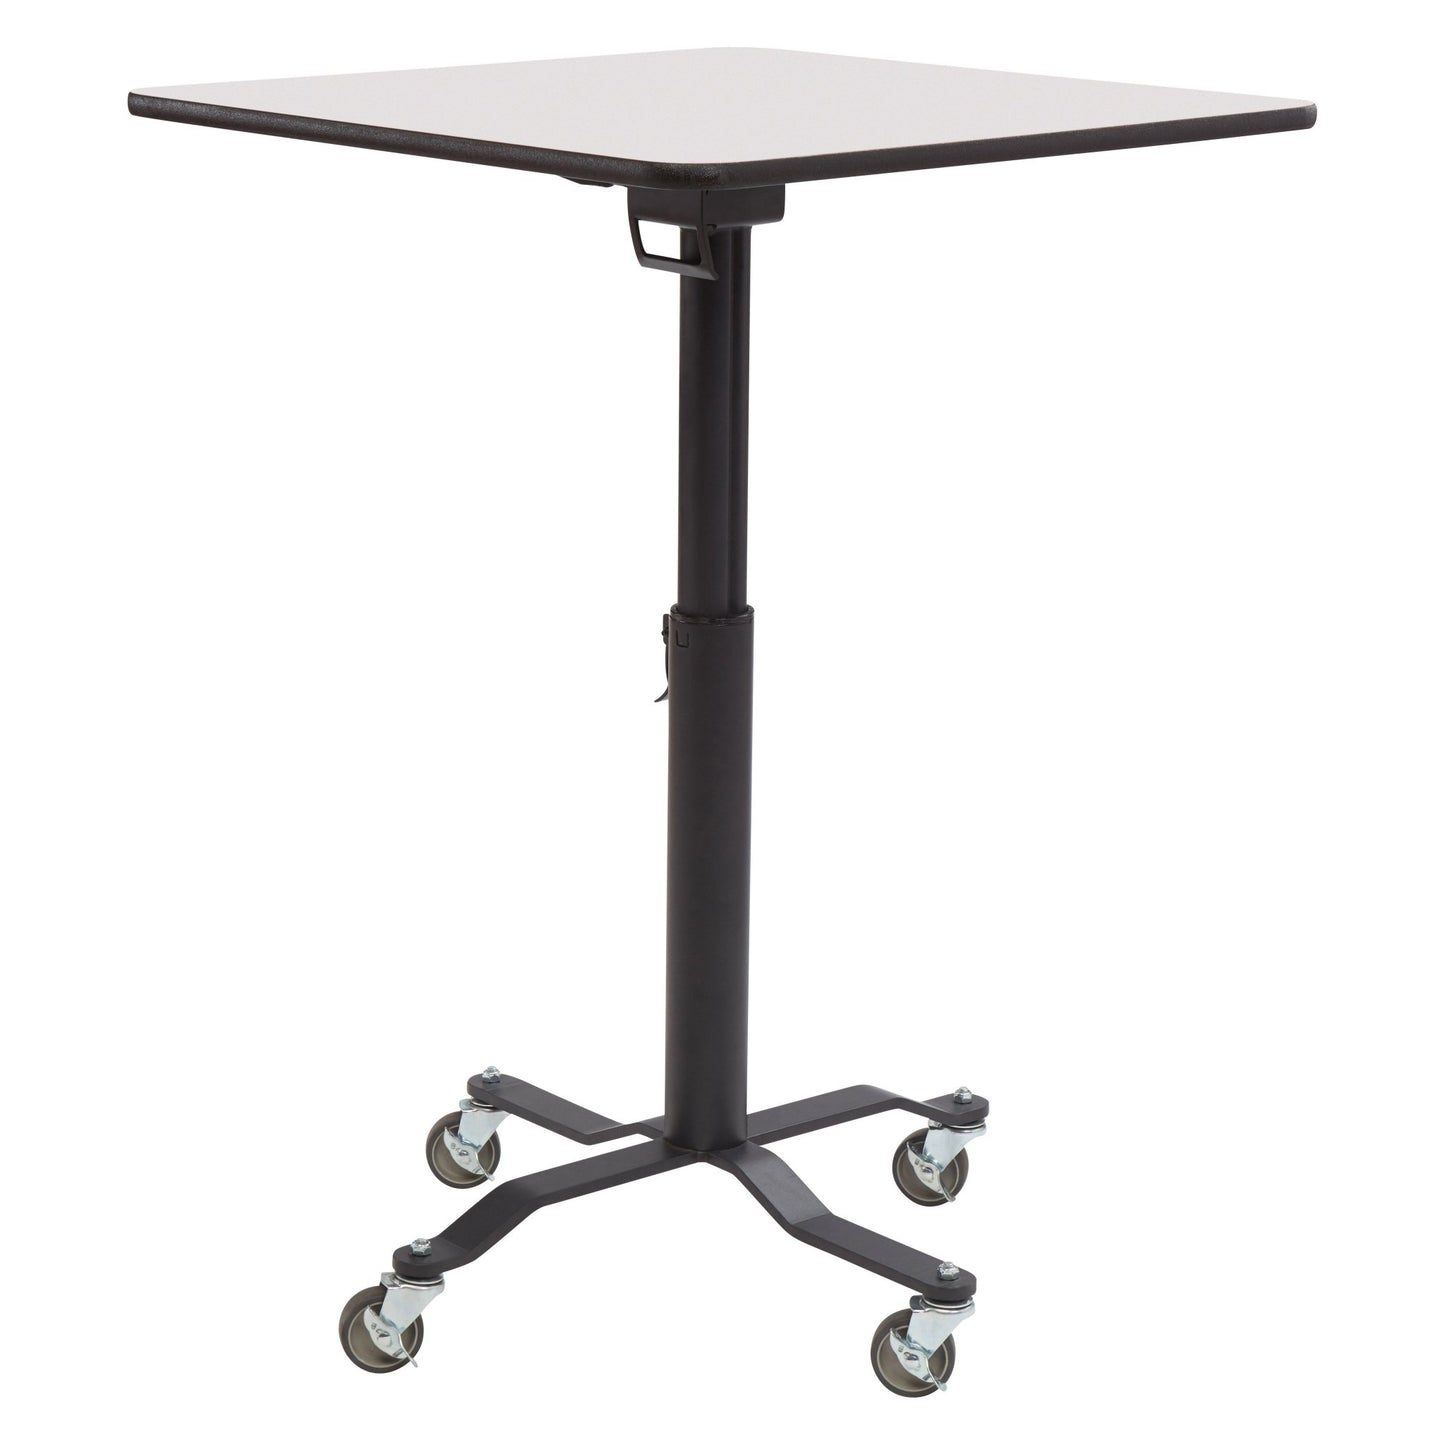 NPS Cafe Time II Table, 30" Square, Whiteboard Top, MDF Core, Protect Edge (NationalPublic Seating NPS-PCT330MDPEWB) - SchoolOutlet